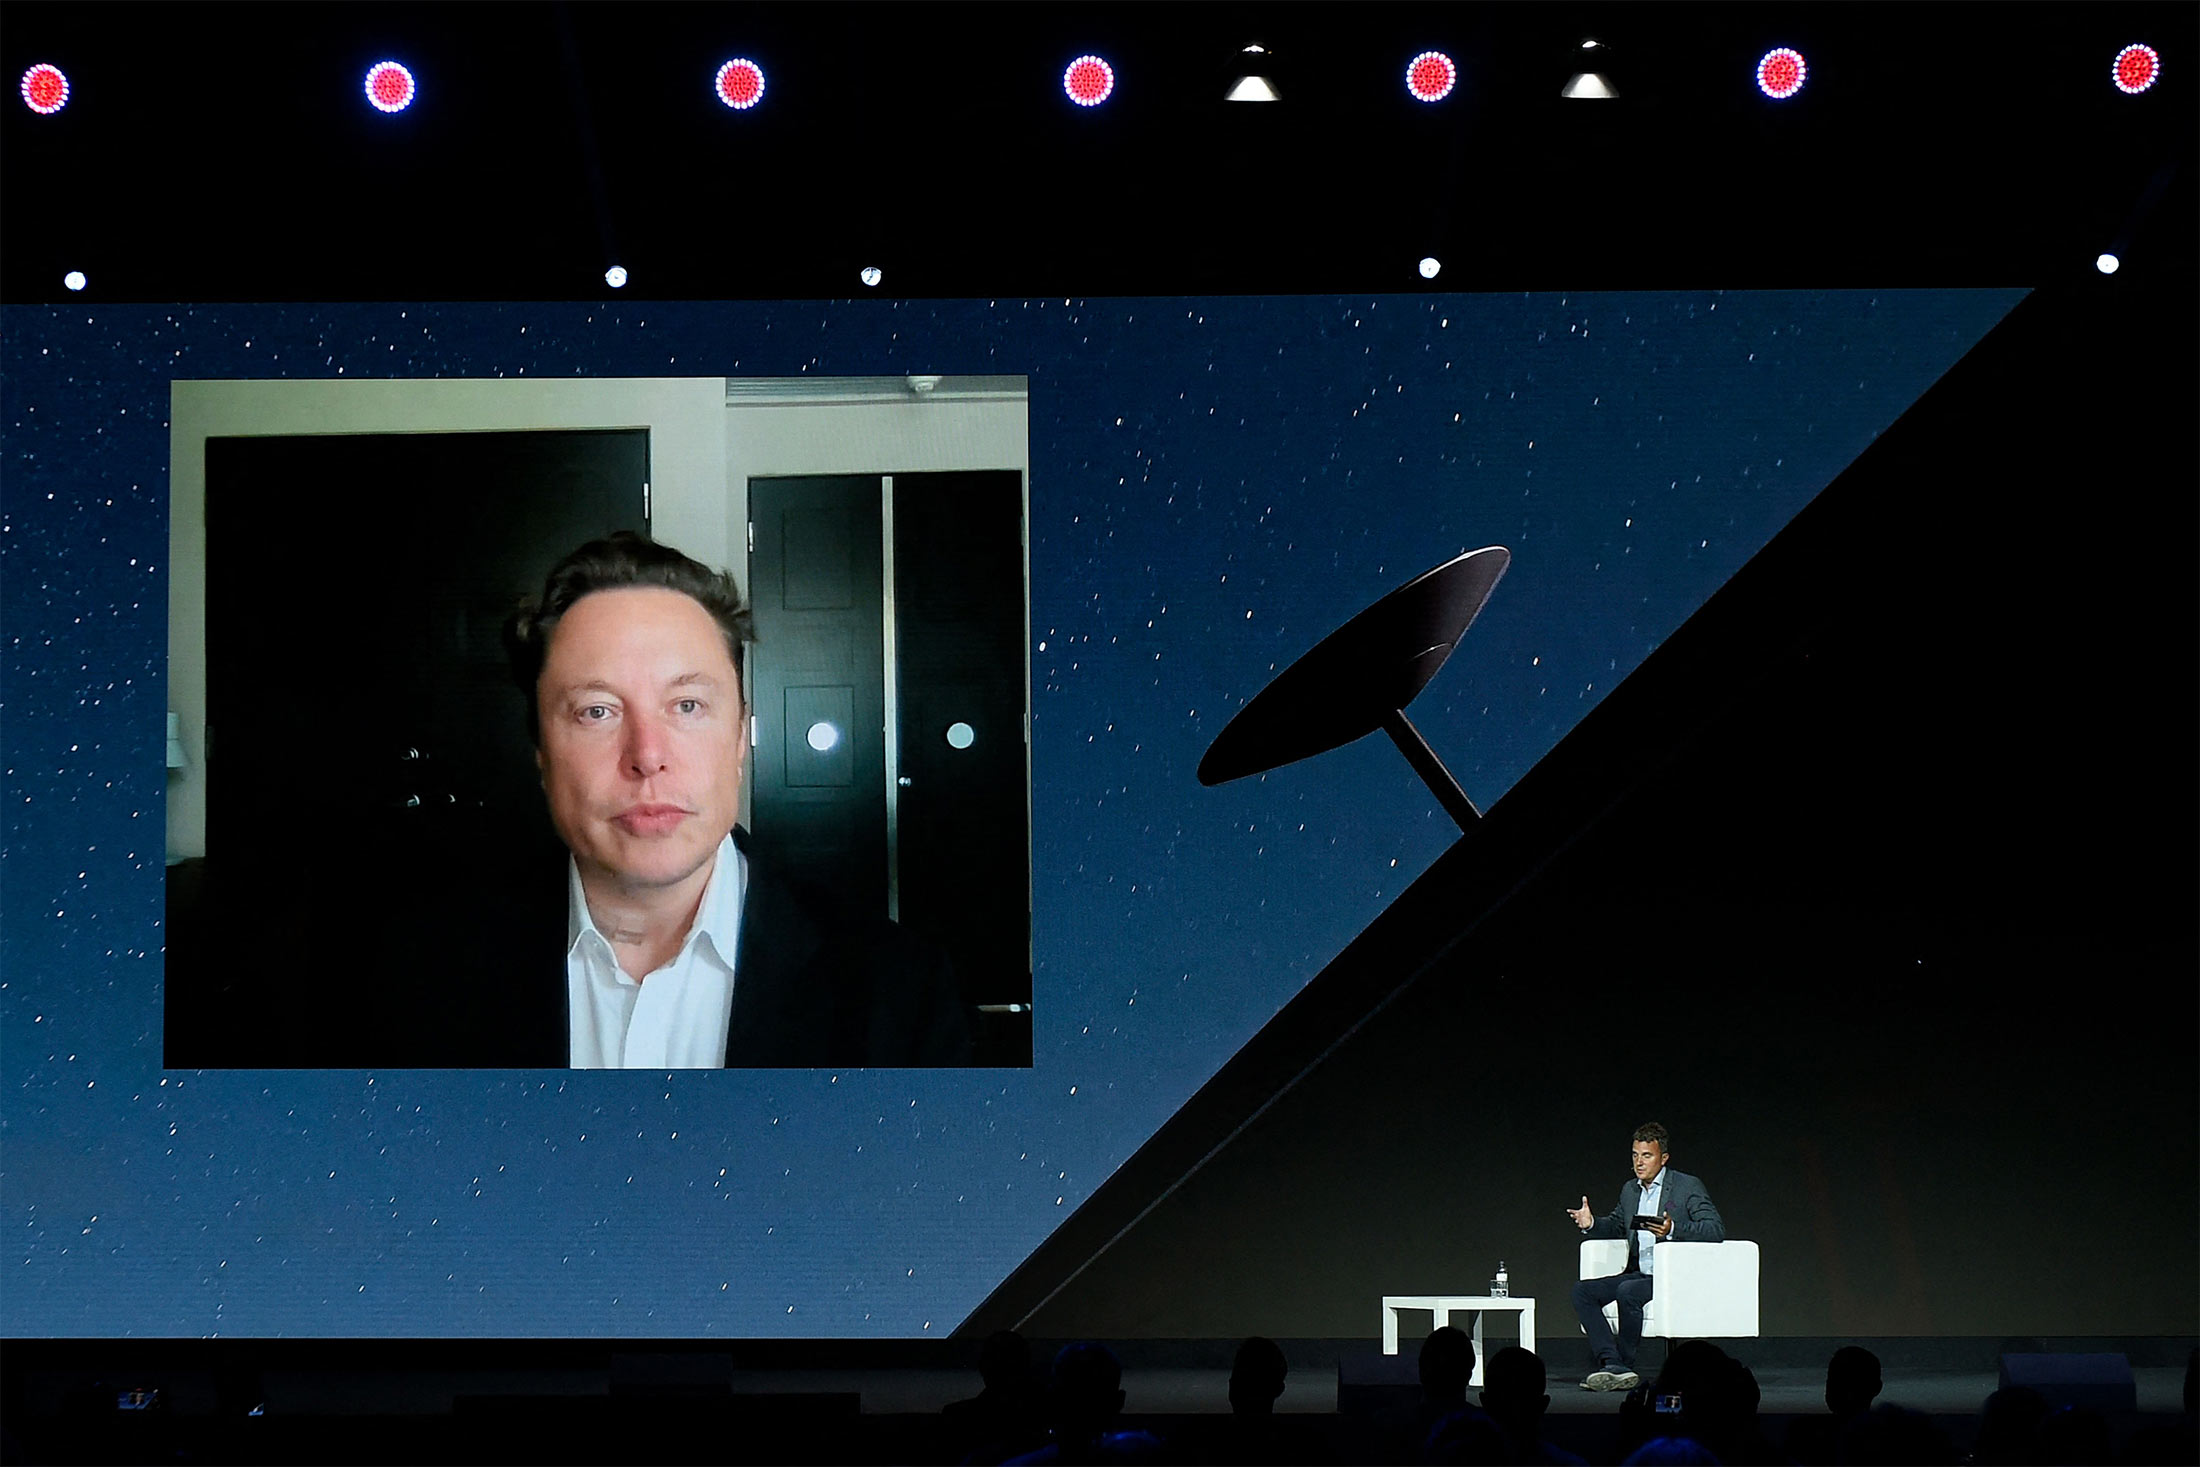 Elon Musk’s Starlink to Deliver Internet to 500,000 Users Within Weeks